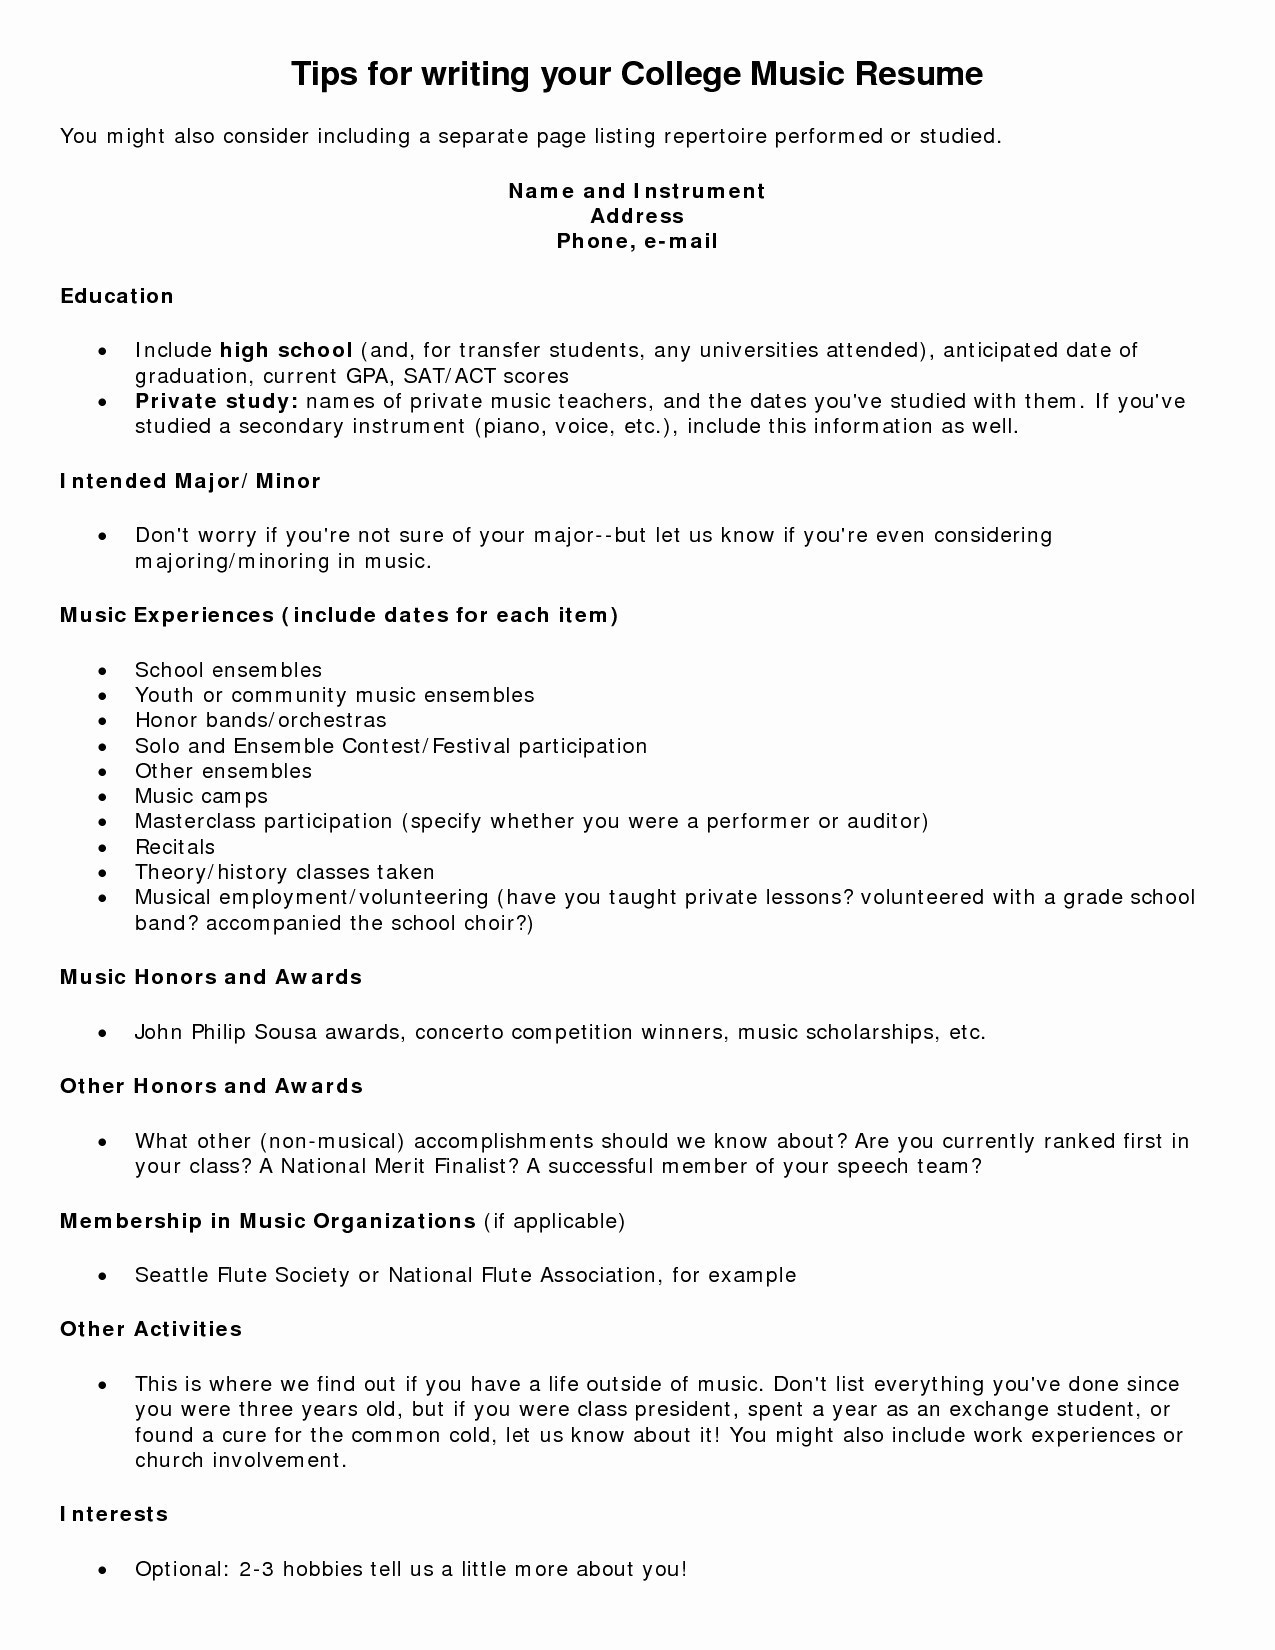 Resume Letter Template - Resume and Cover Letter Template Unique Lovely Letter Template Fresh